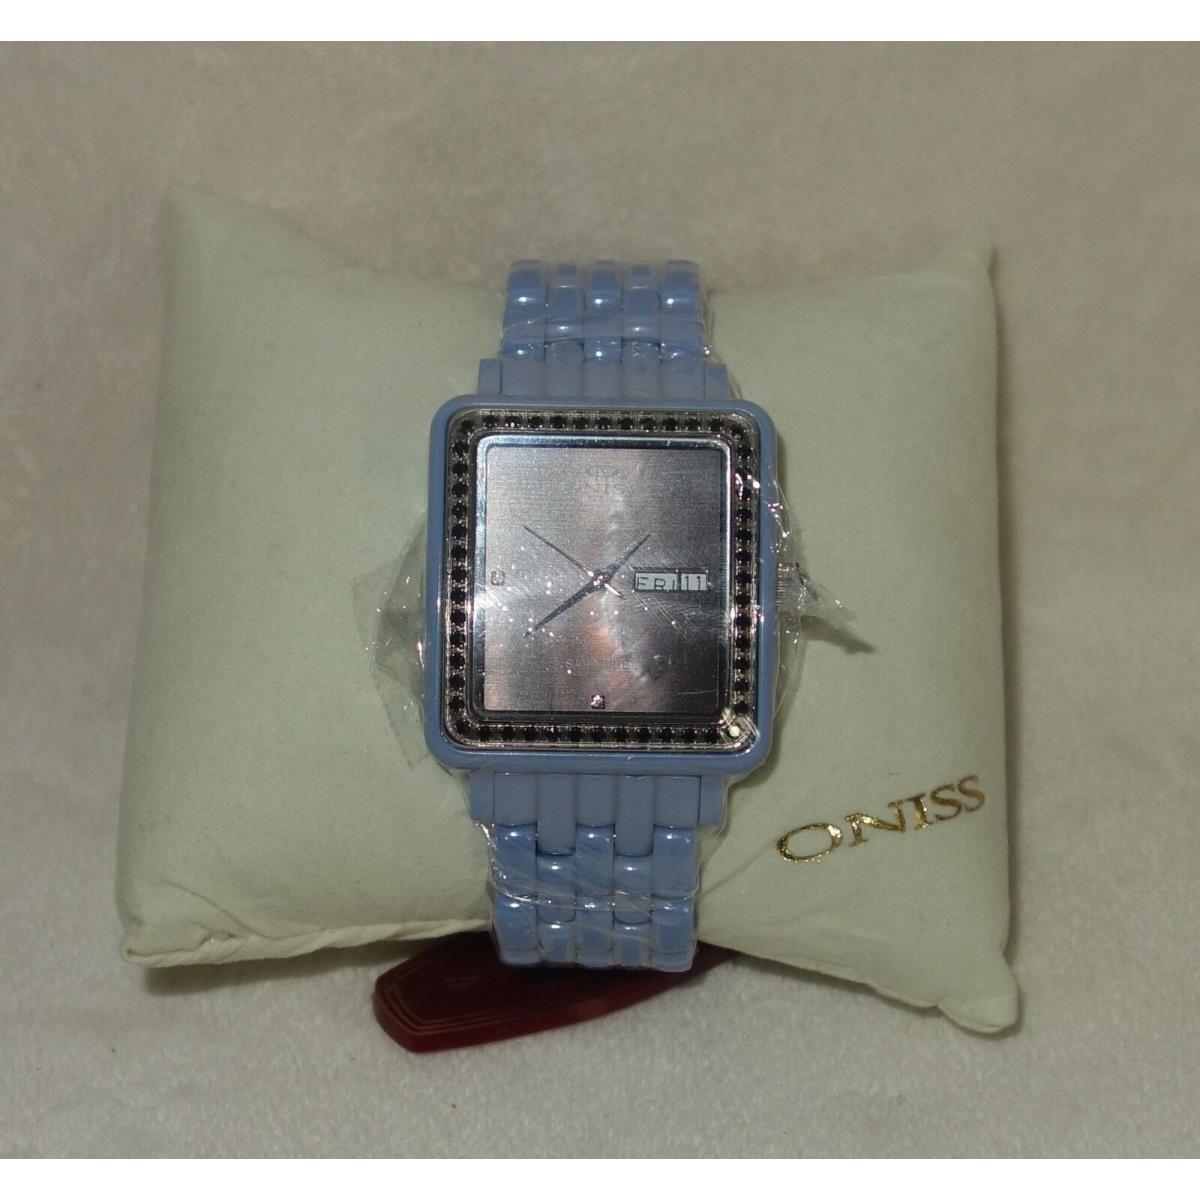 Oniss Paris Crystal Accented Hi Tech Blue Ceramic Brown Dial Watch